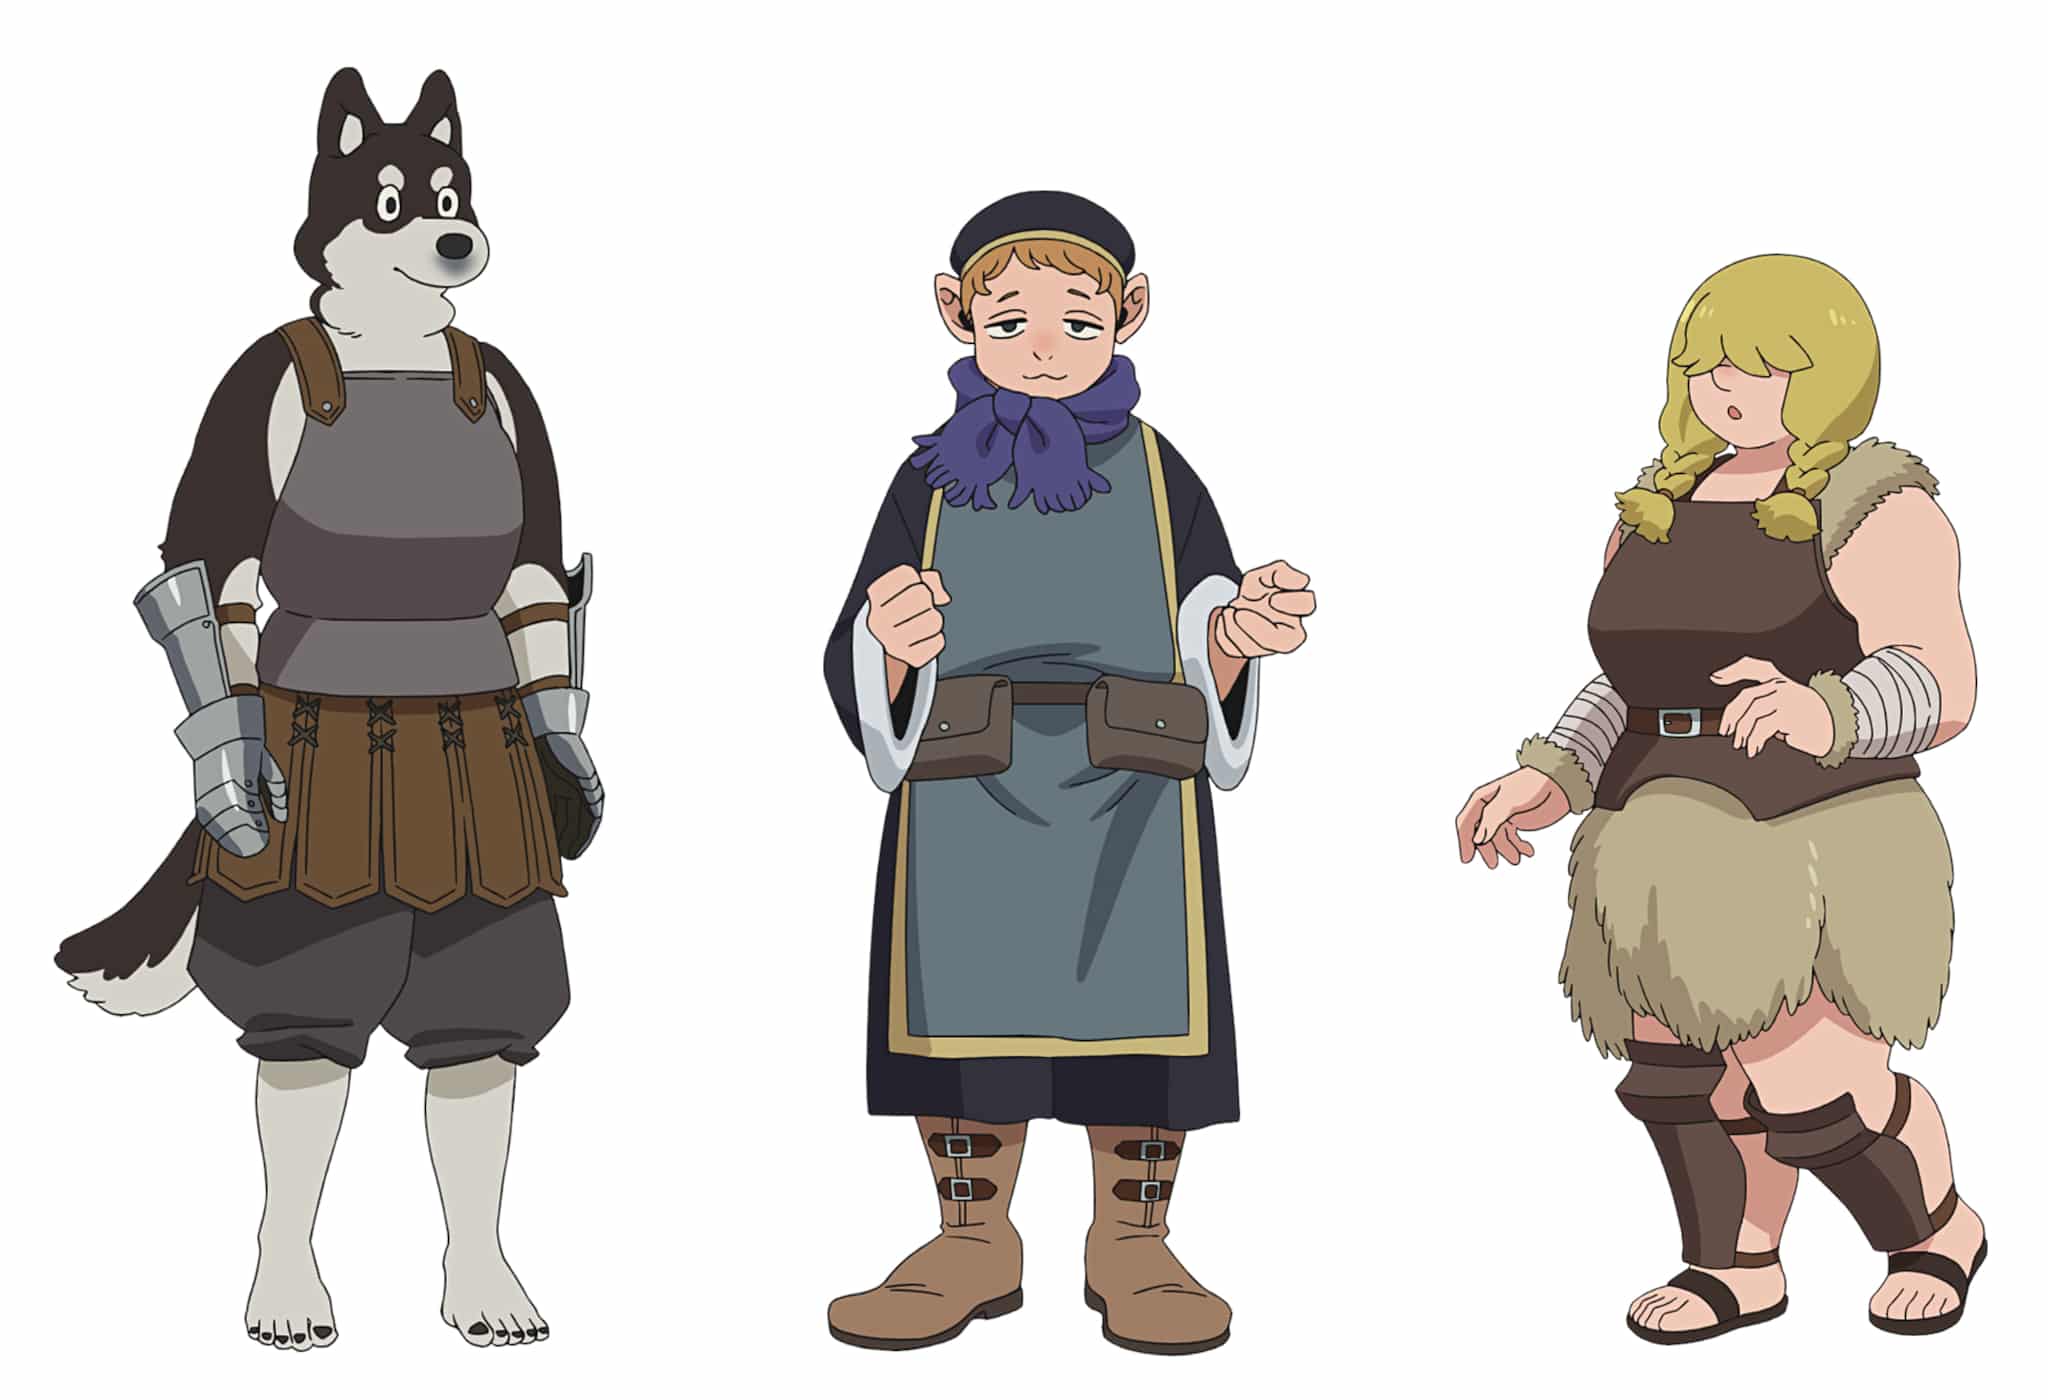 Character Design de Kuro, Holm et Daya pour l'anime Delicious in Dungeon